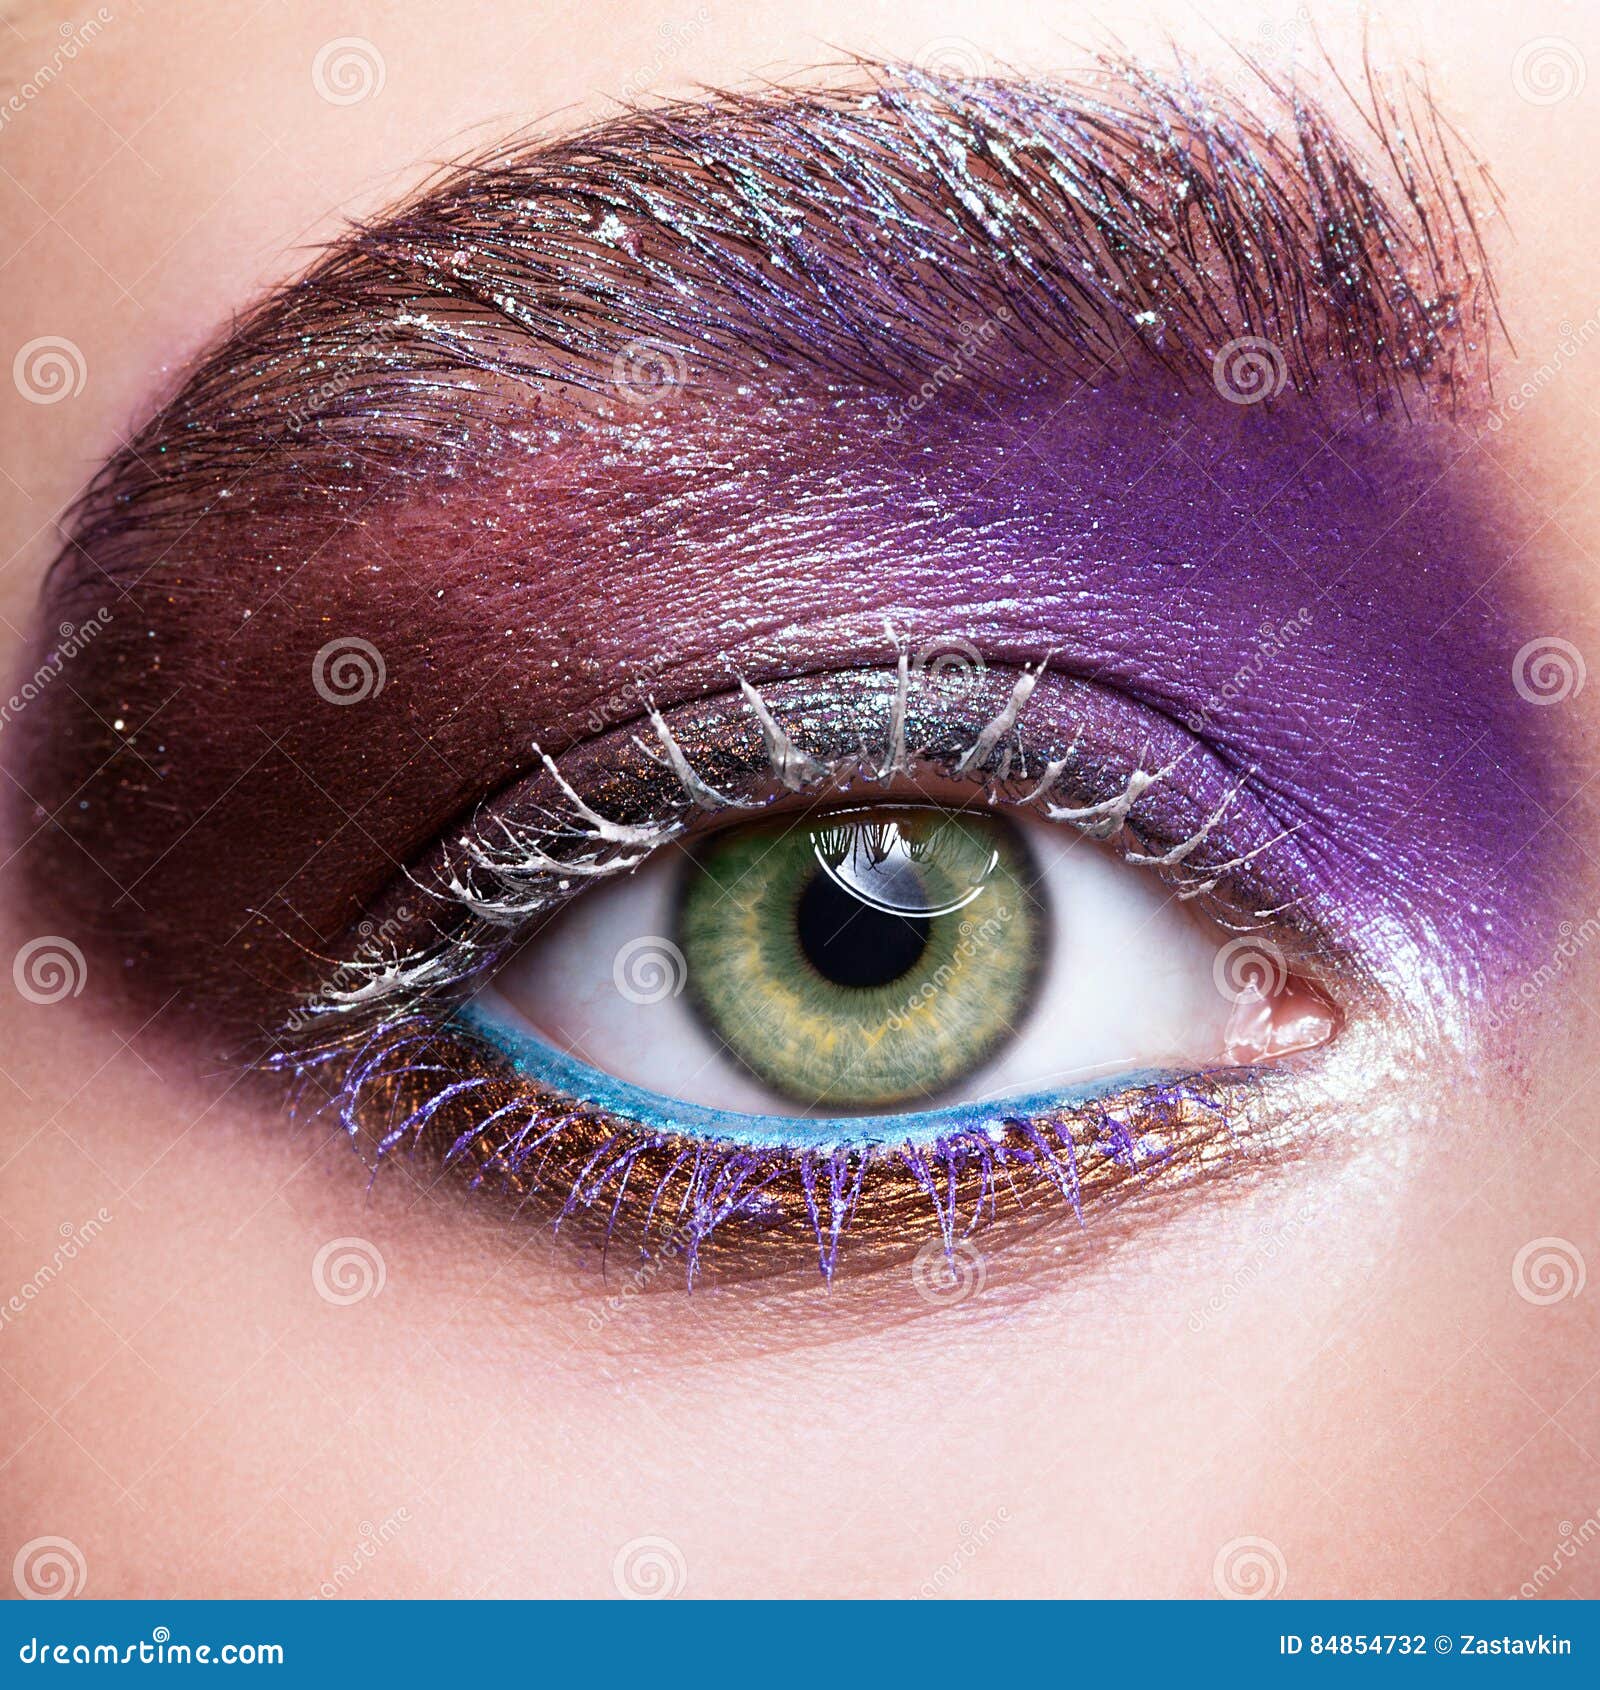 29 365 Purple Eyes Photos Free Royalty Free Stock Photos From Dreamstime